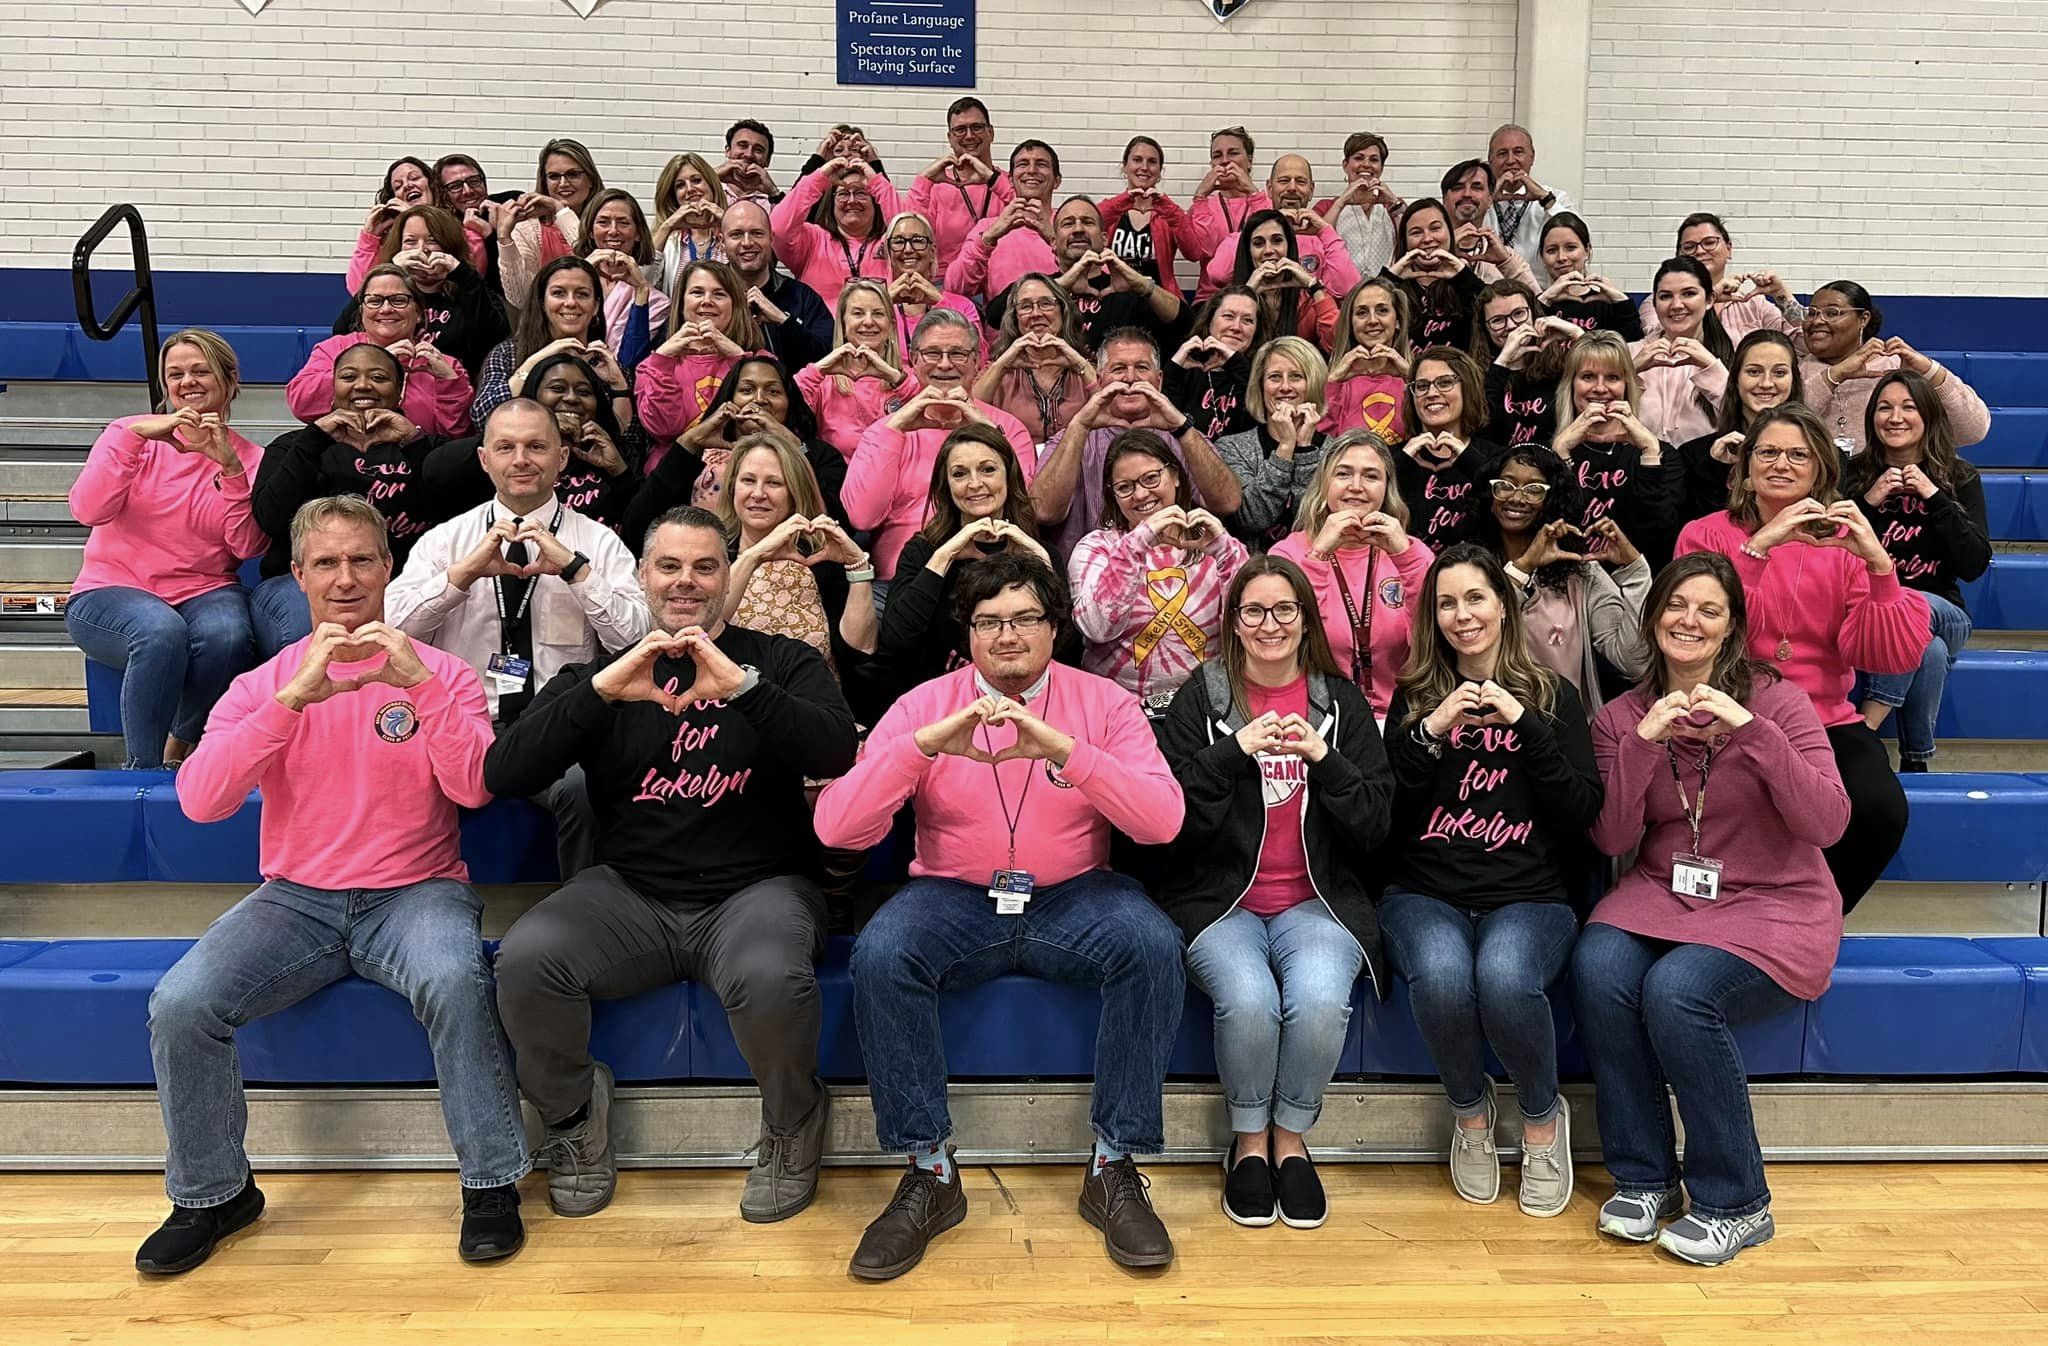 Staff in pink making hearts with their hands